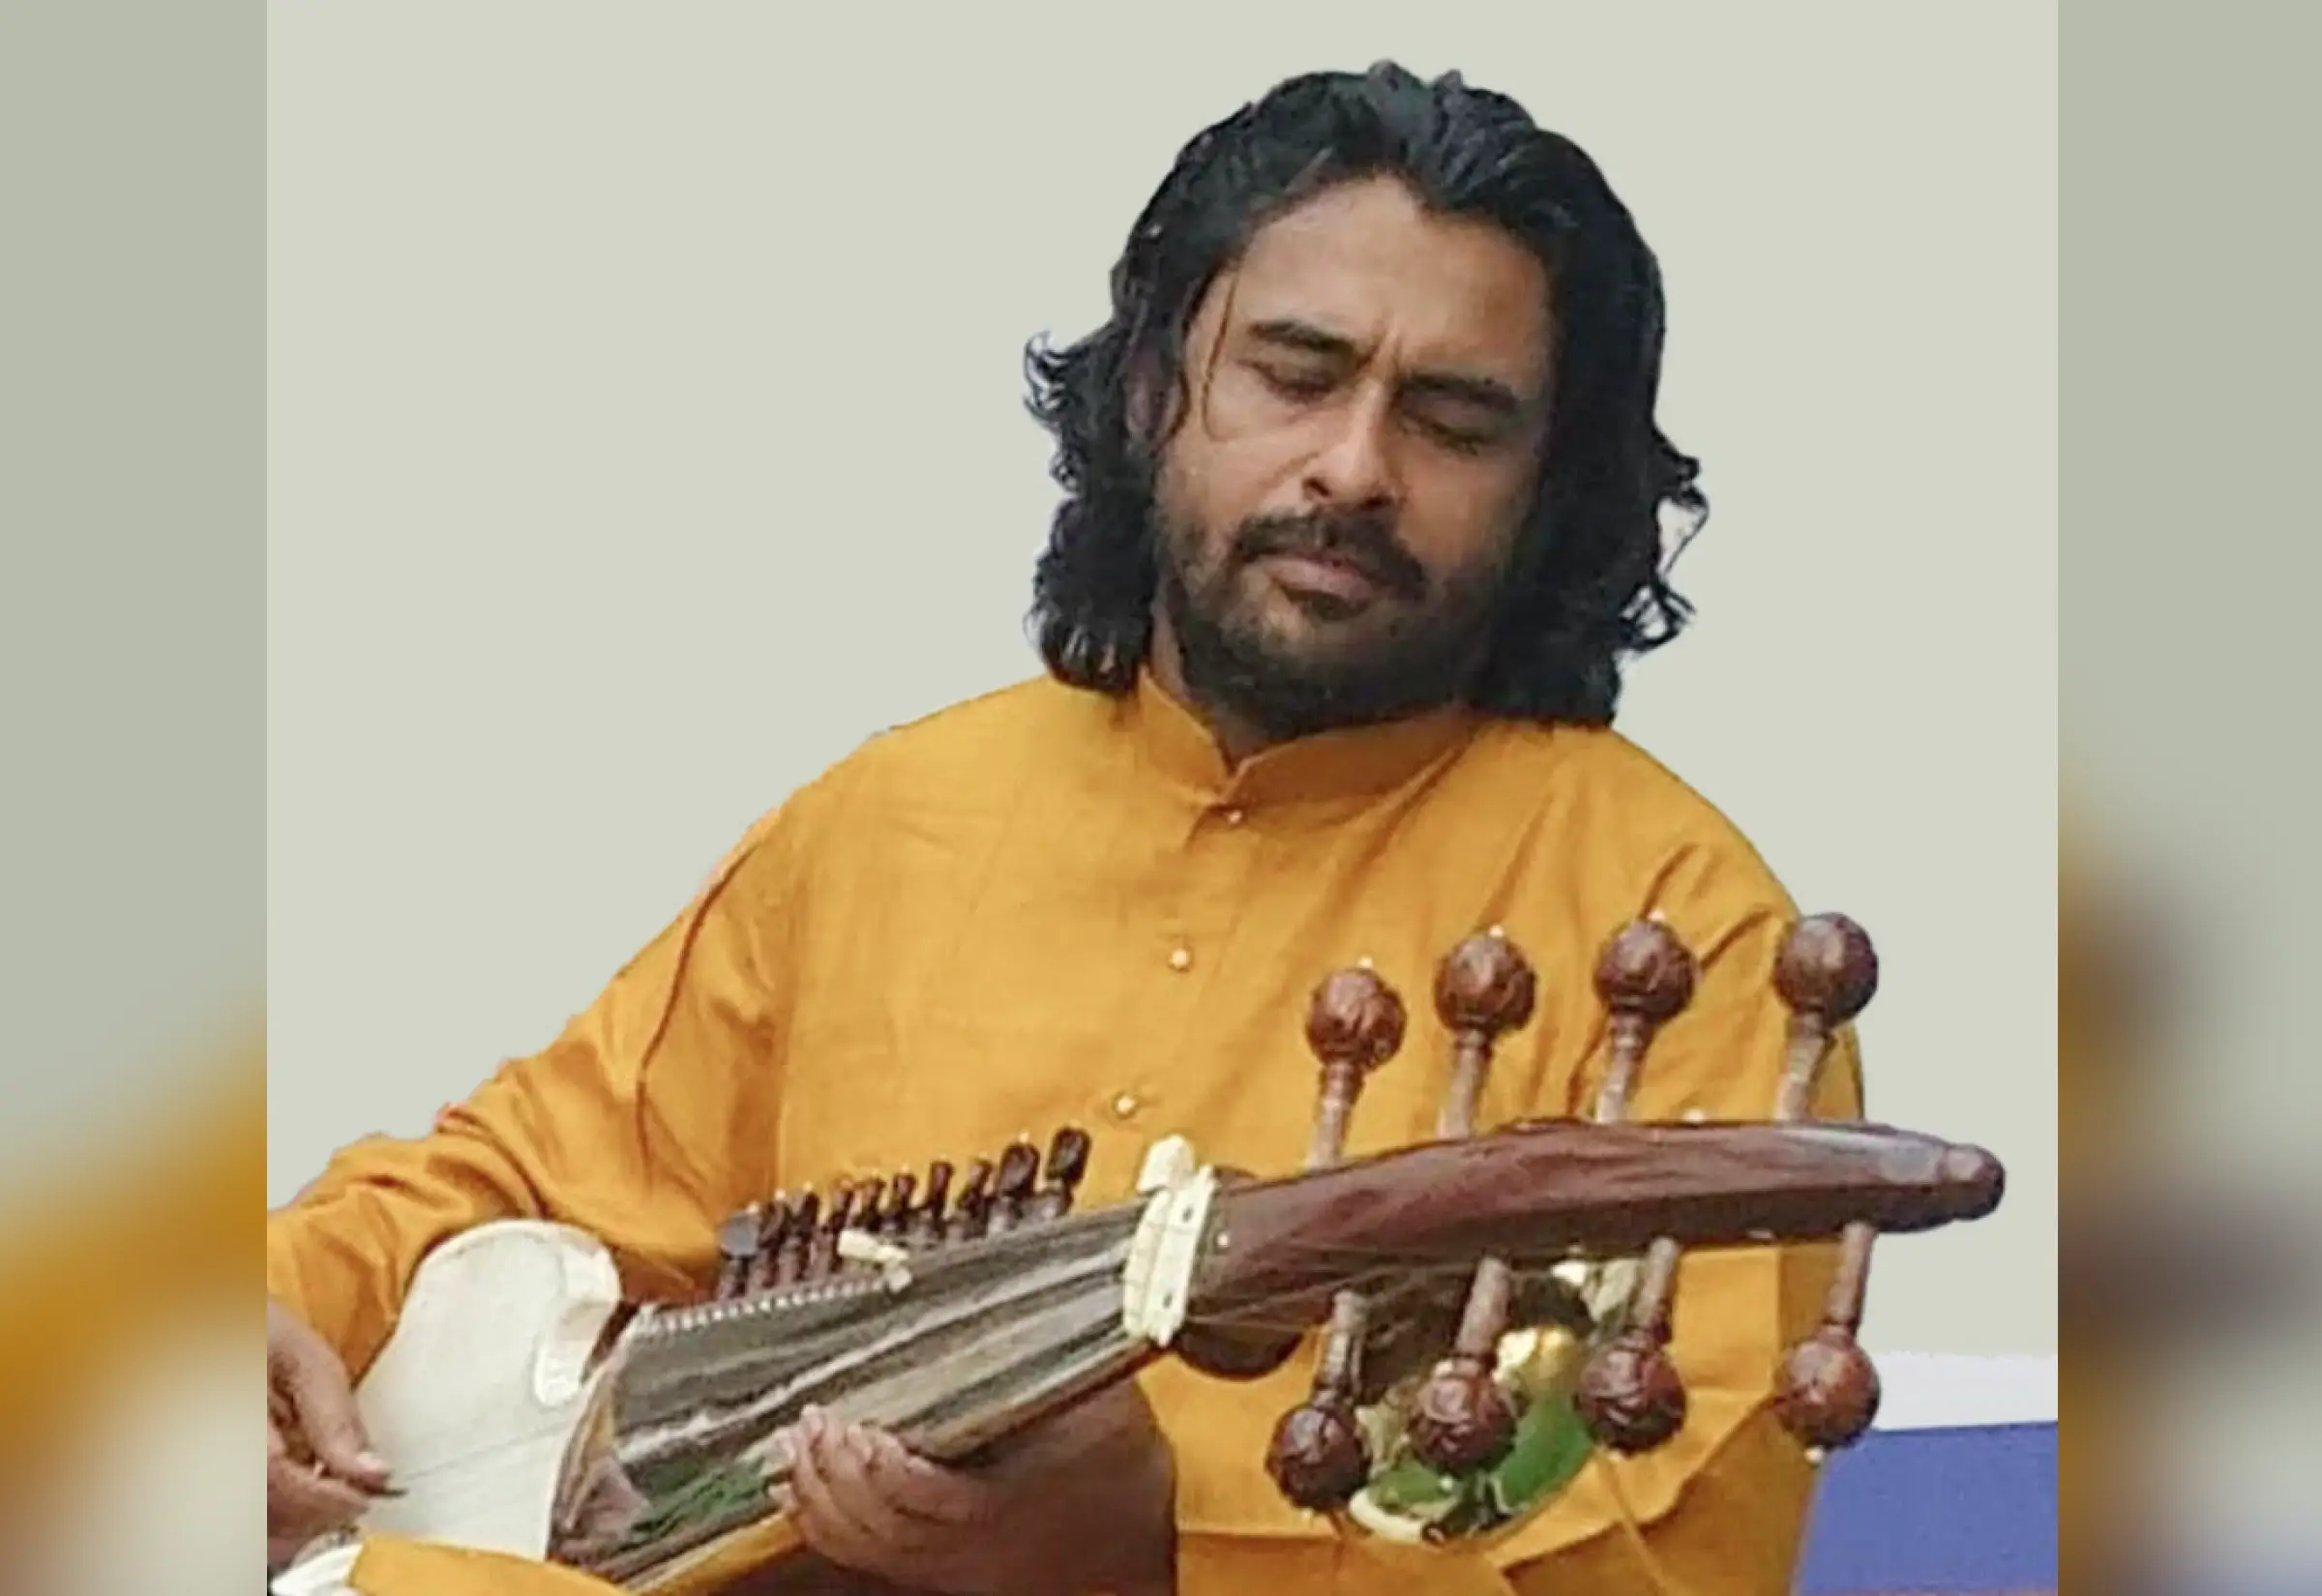 Sarod Classes for Professionals by Sougata Roy Chowdhury on ipassio